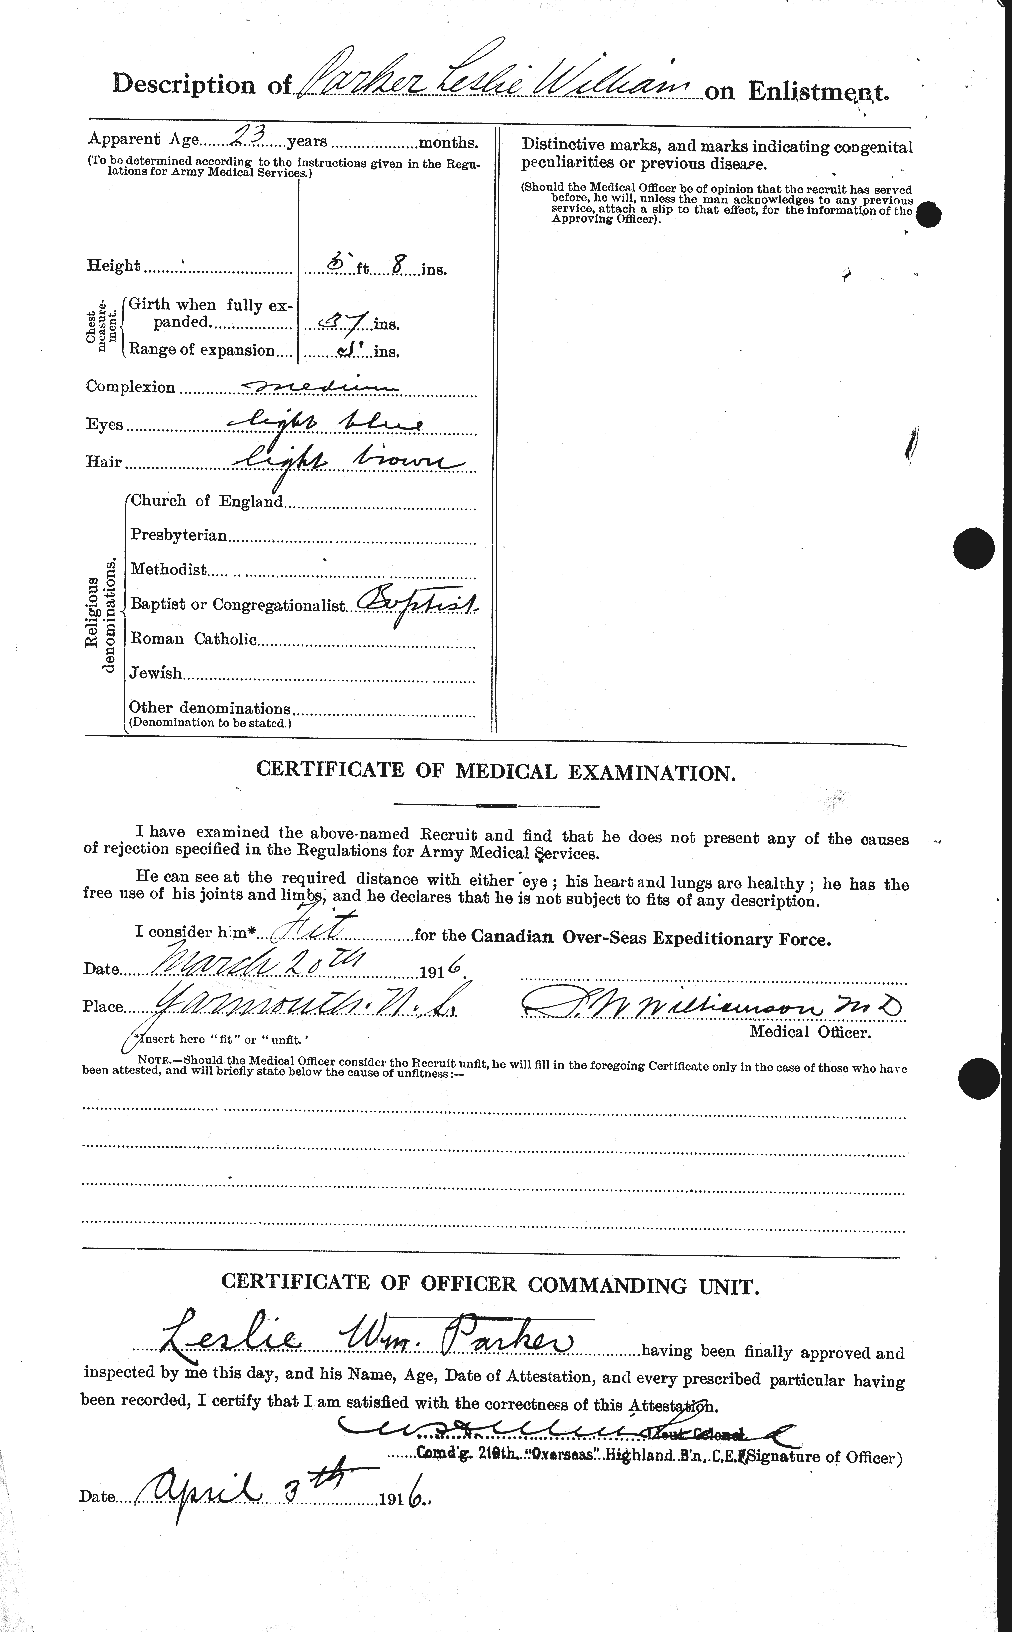 Personnel Records of the First World War - CEF 565530b